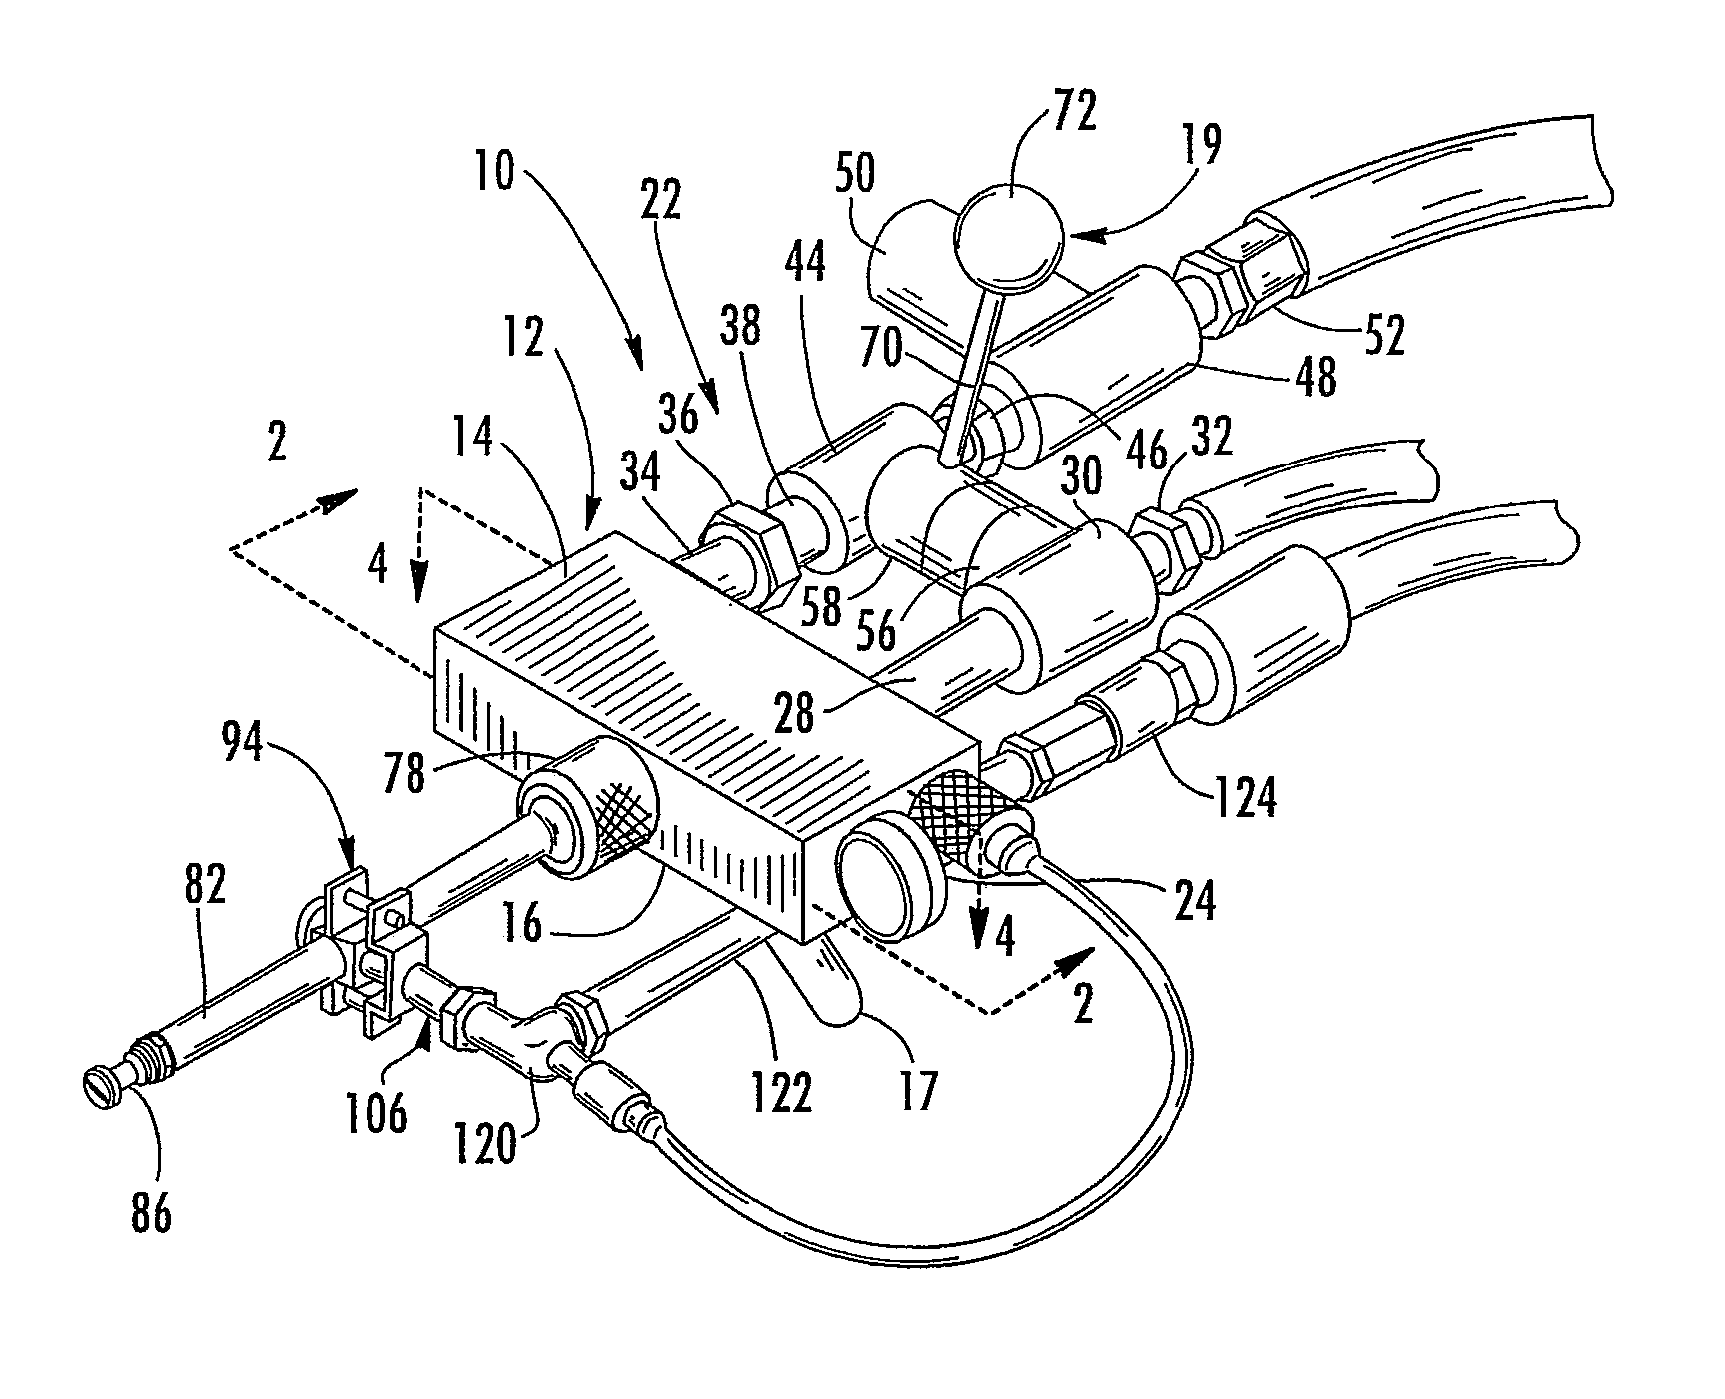 Method Of Using a Spray Gun and Material Produced Thereby